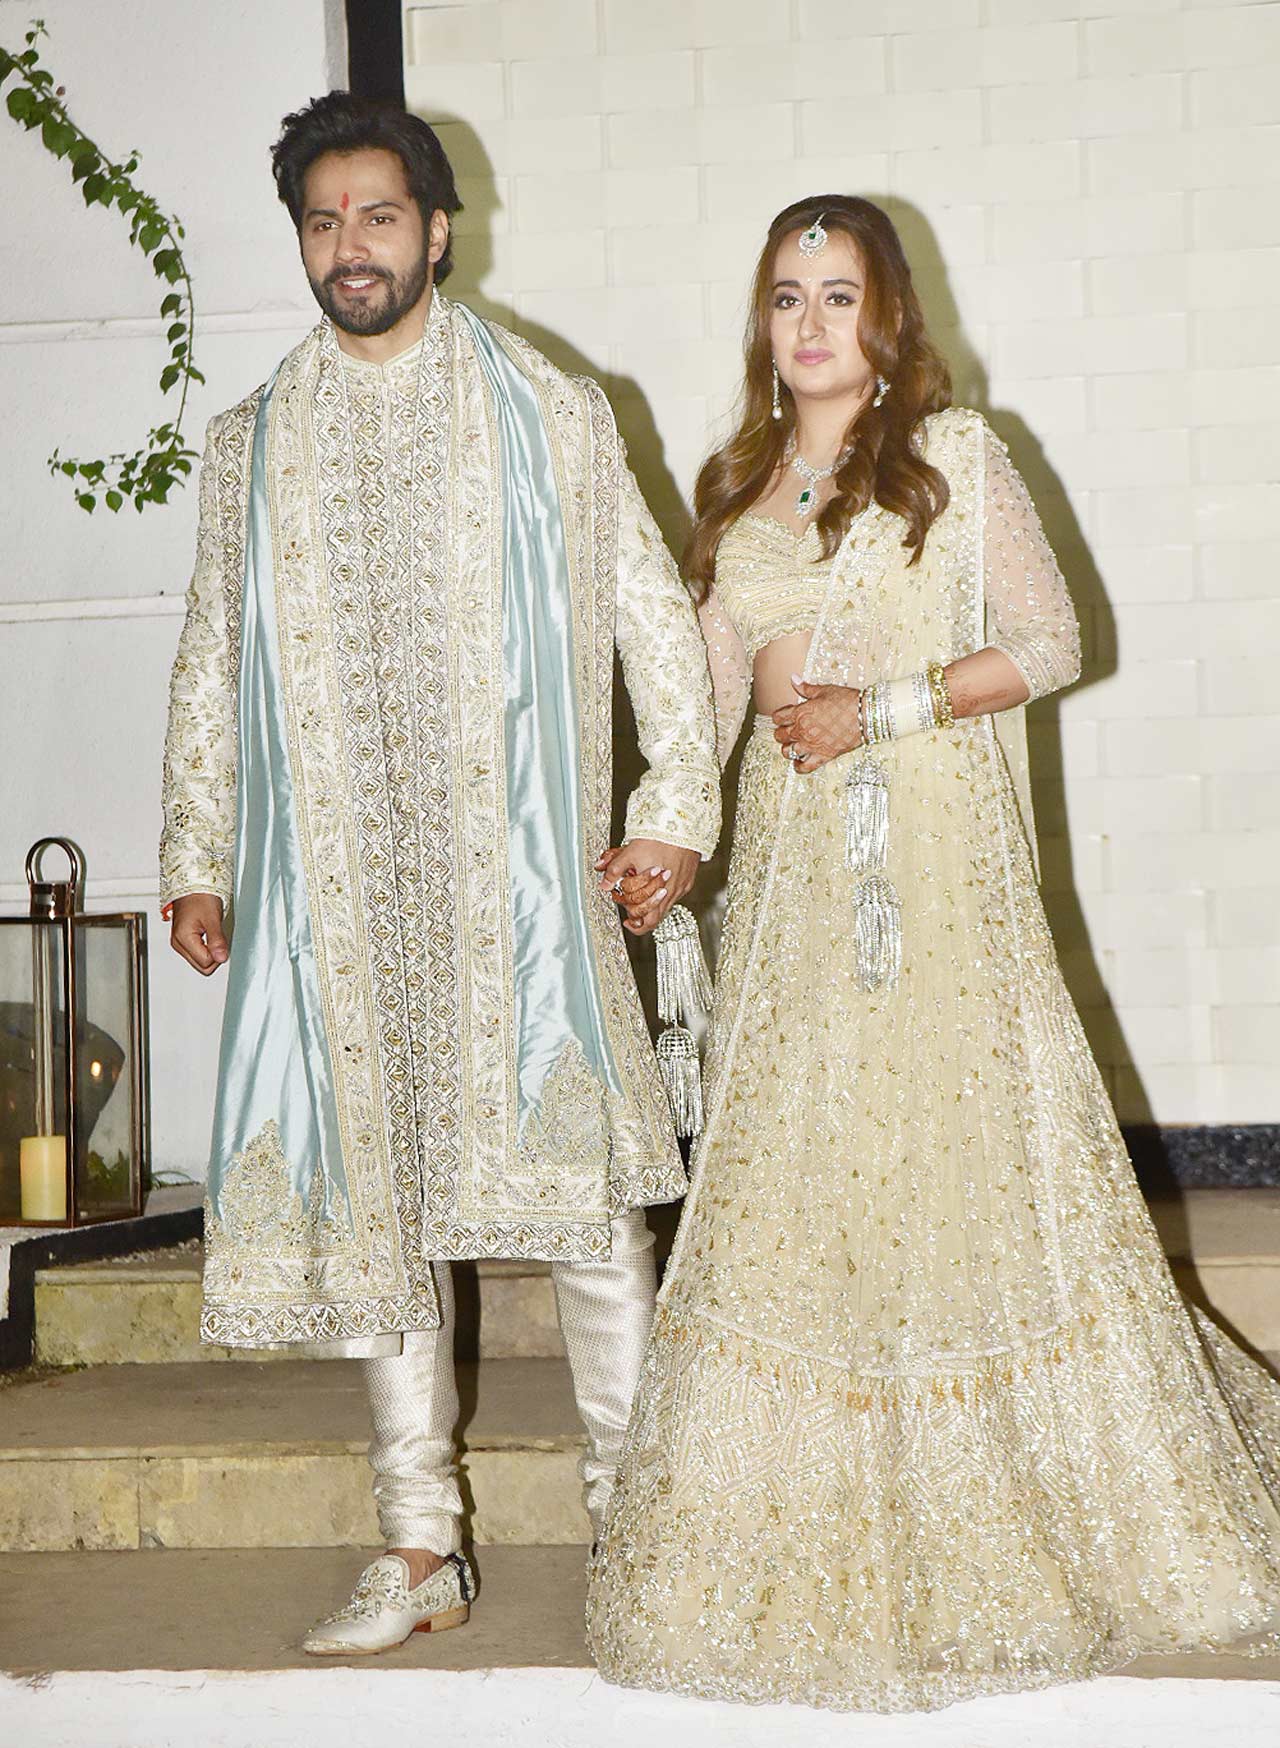 Despite the pandemic, Varun Dhawan and Natasha Dalal battled the odds for their happily-ever-after.